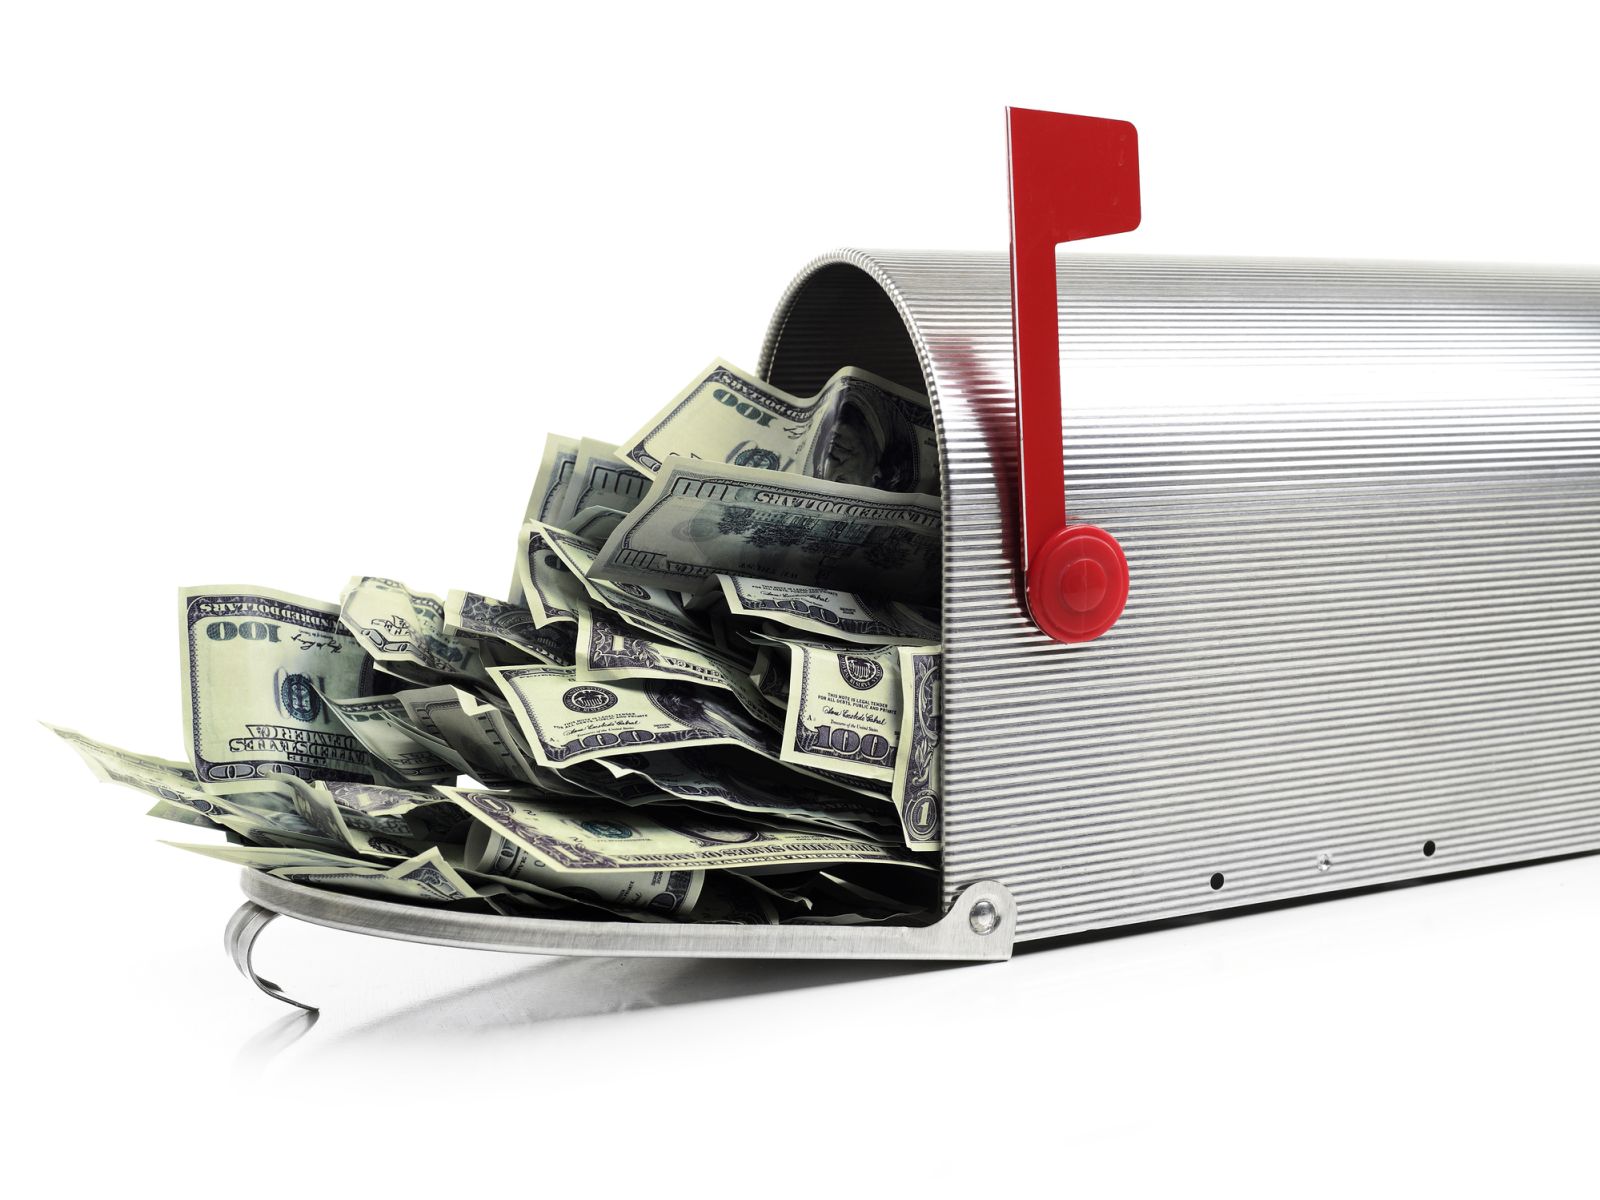 Dollars and Wallets - stimulus money in the mail by Goir via iStock